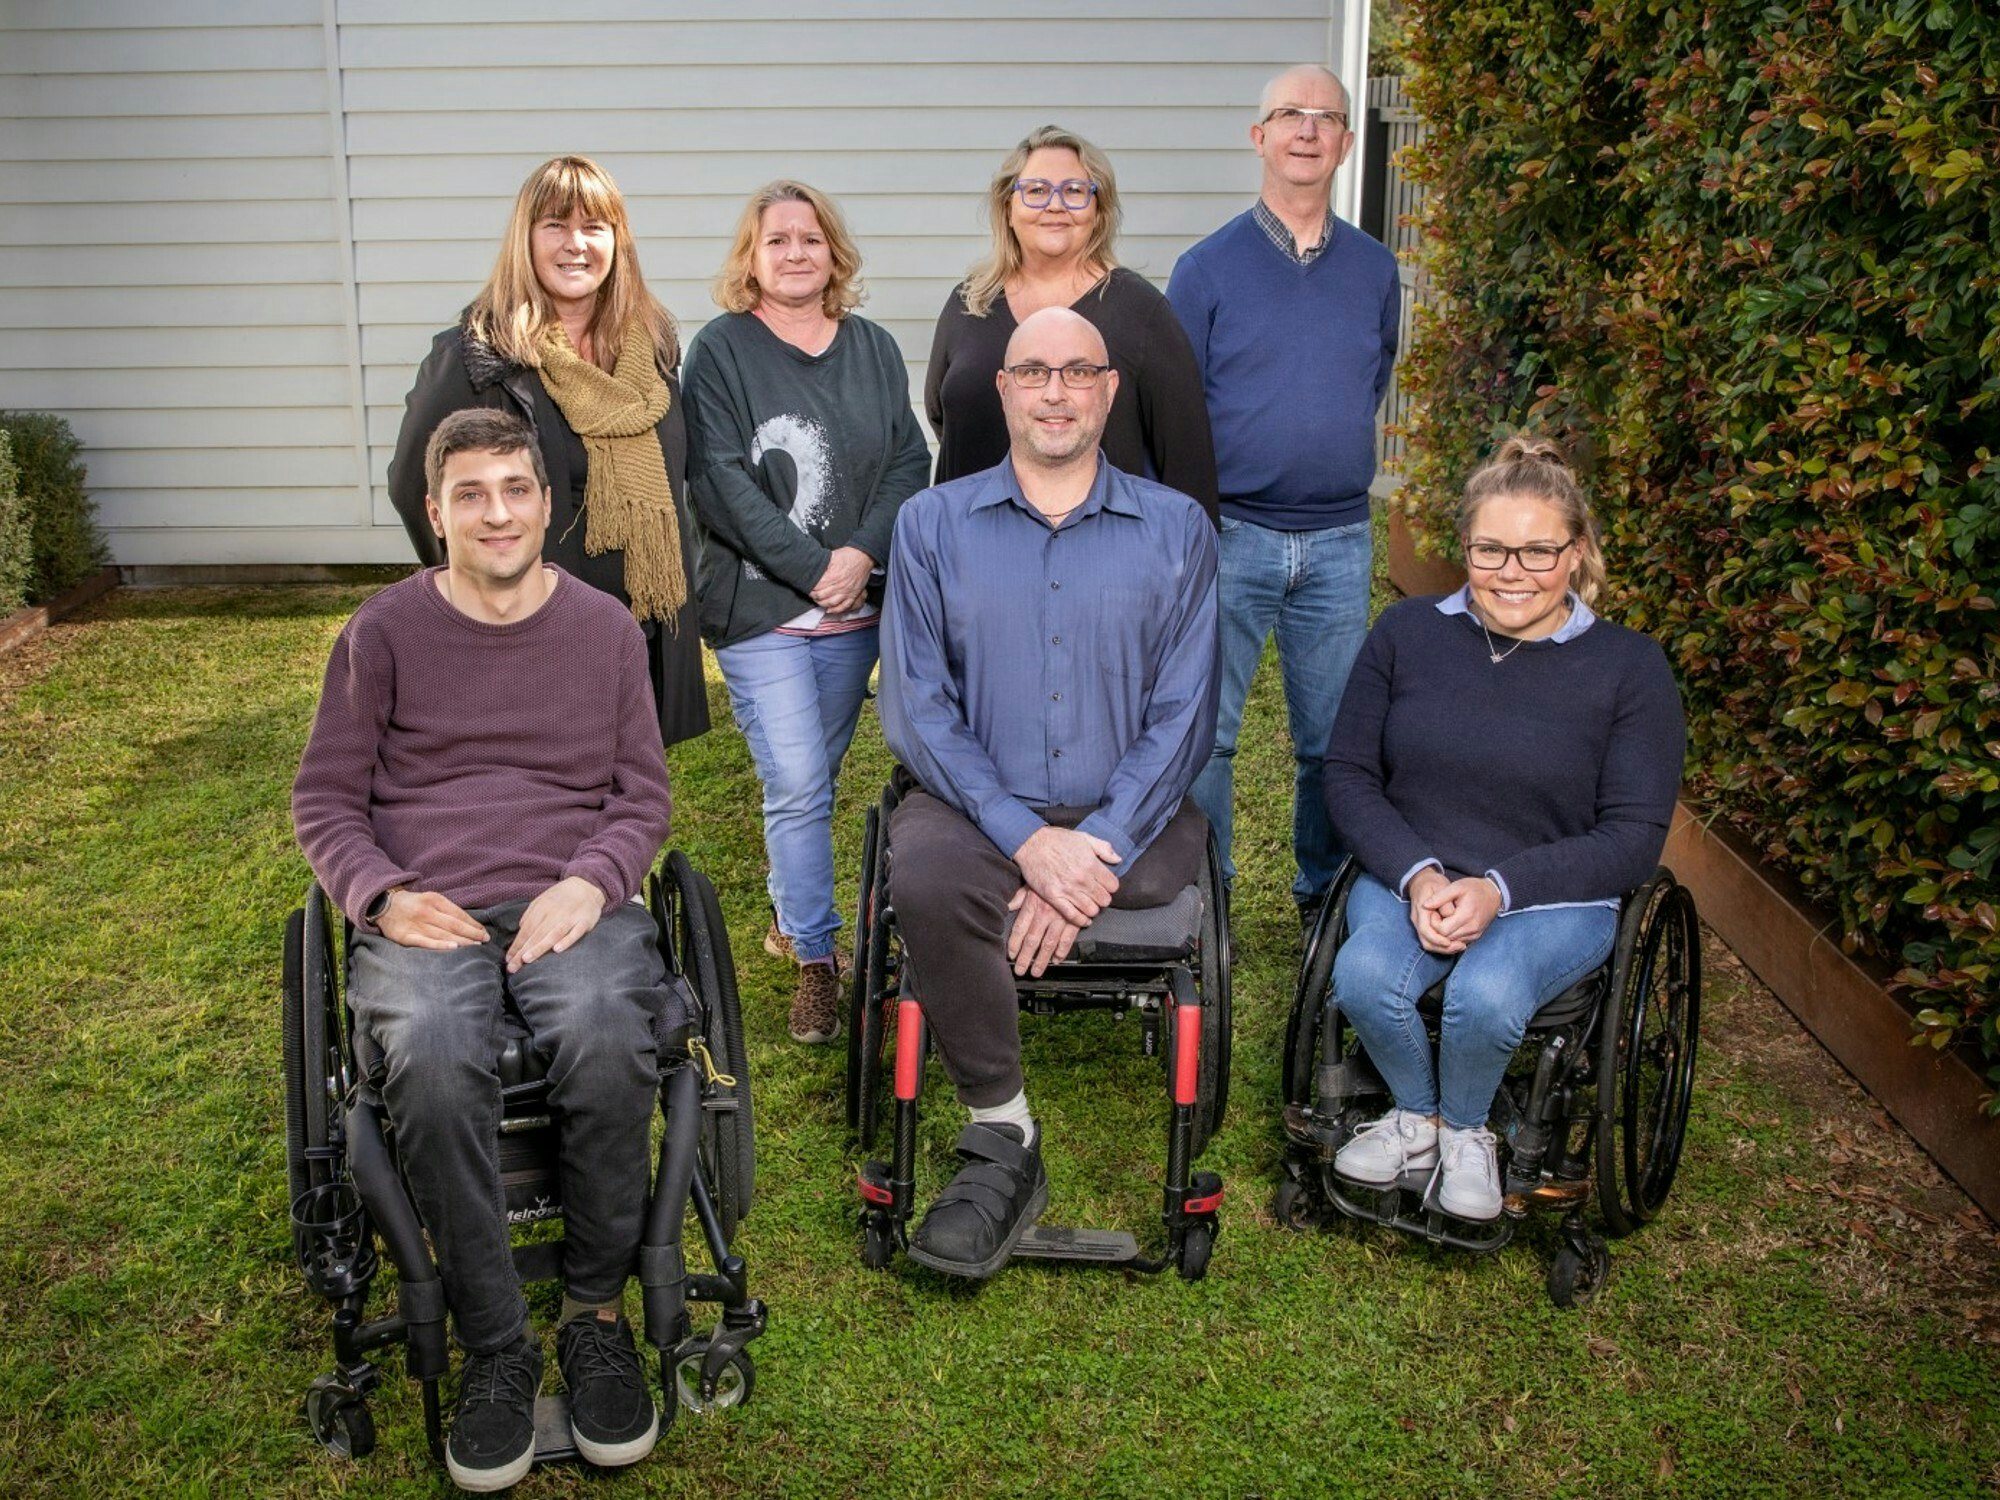 <p>Accessible Accommodation team have lived experience with disabilities themselves, uniquely placed to understand their guests mobility needs. [Source: Accessible Accommodation]</p>
